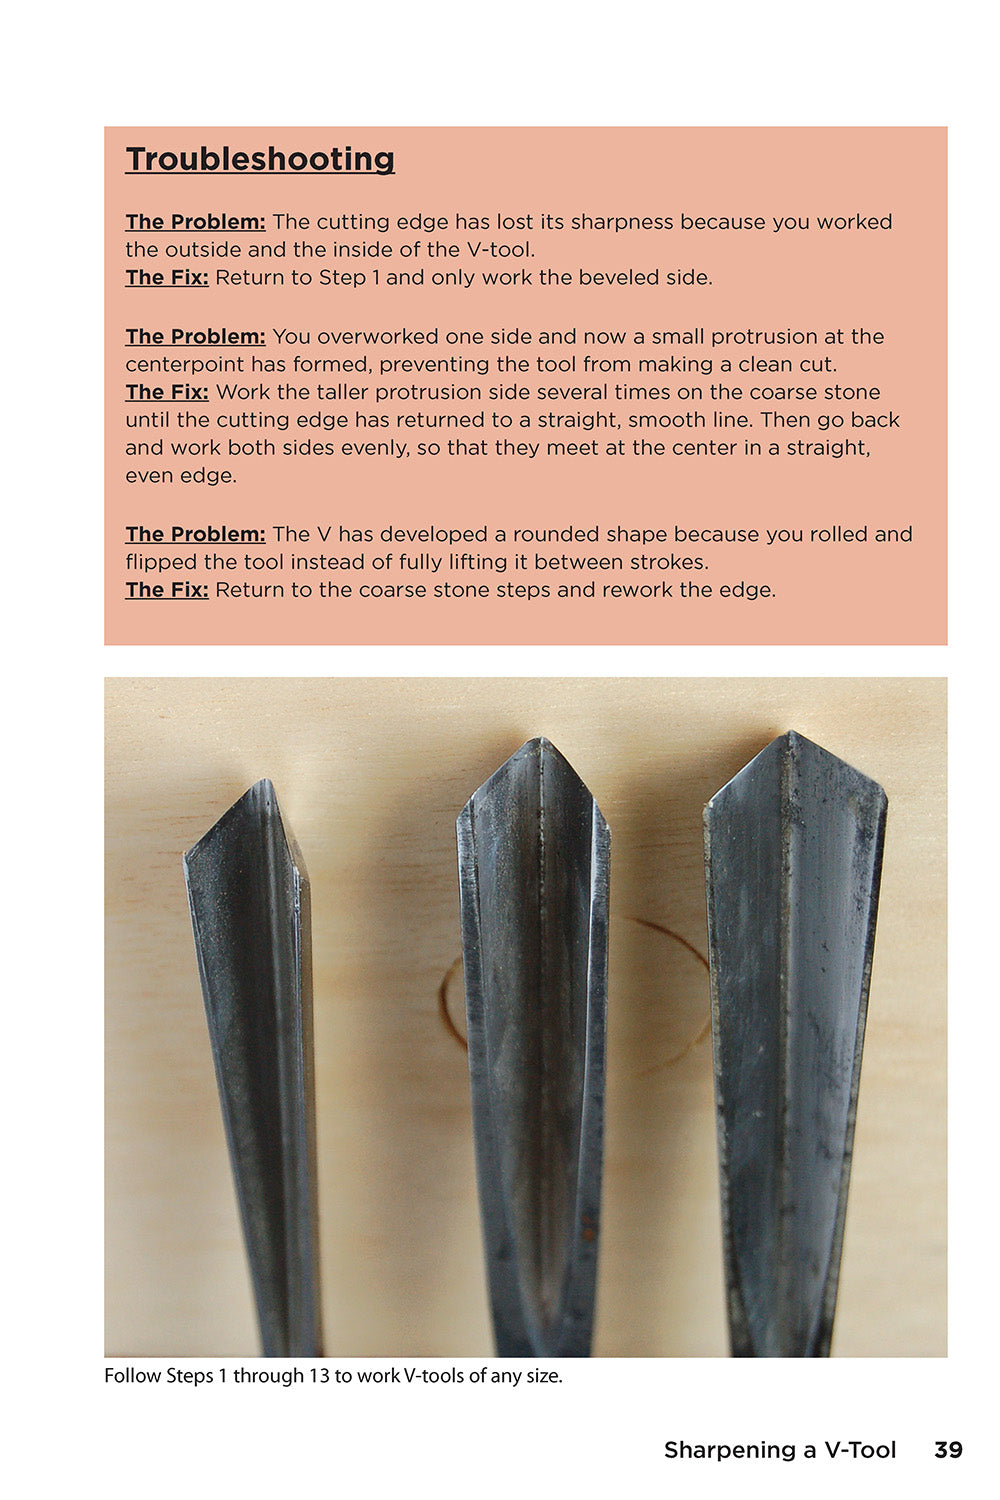 Wilto Makes Food - A Woodworker's Guide to Knife Sharpening